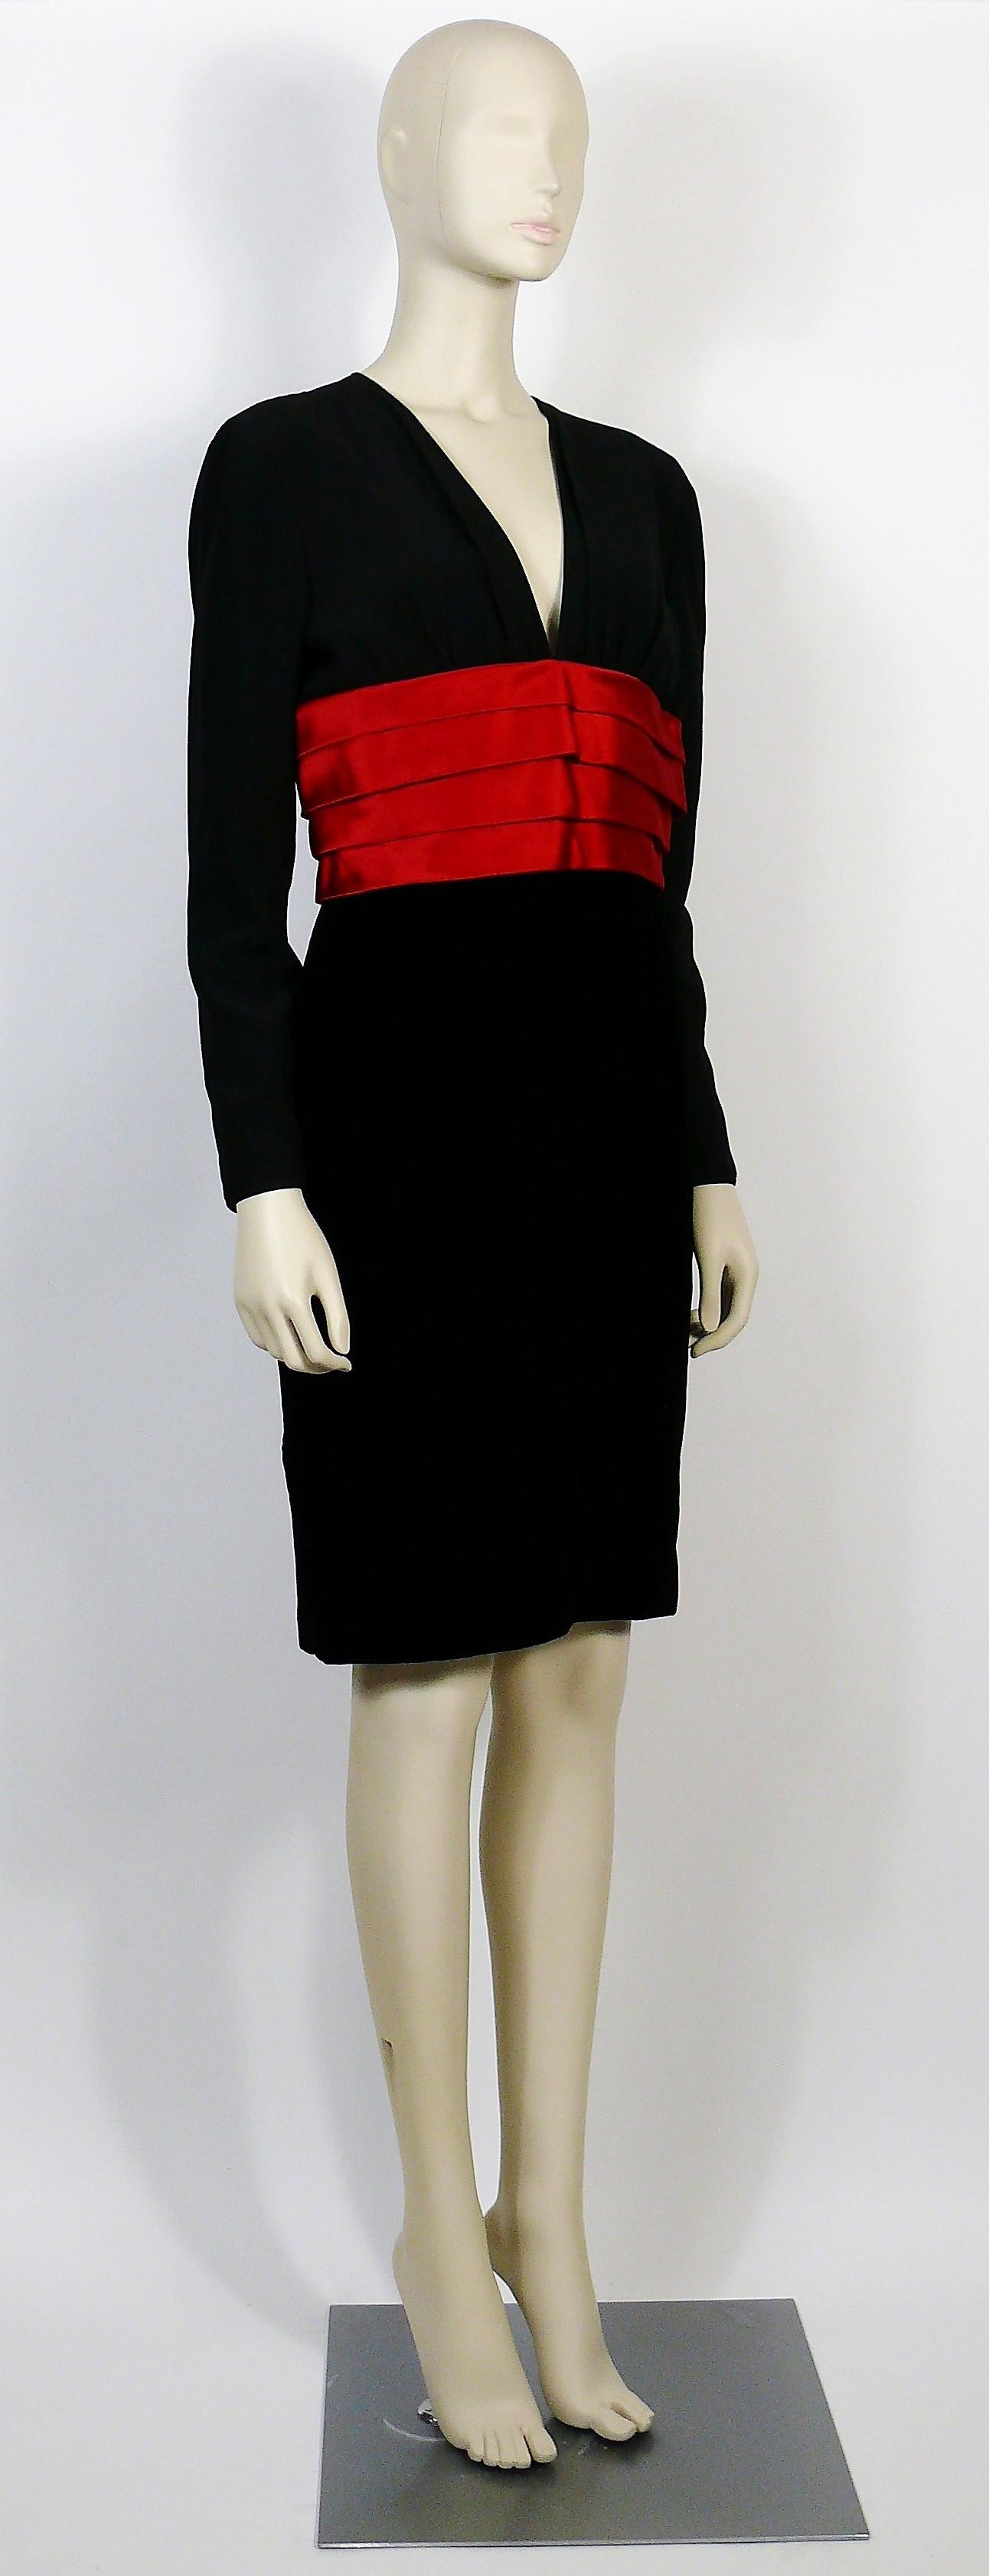 VALENTINO Night classic black and red cocktail dress.

This dress features :
- Black silk matte crepe upper bodice and sleeves.
- Deep V collar.
- Red satin cumberbund style middle boddice section.
- Black velvet skirt.
- Zipper closure on the bakc